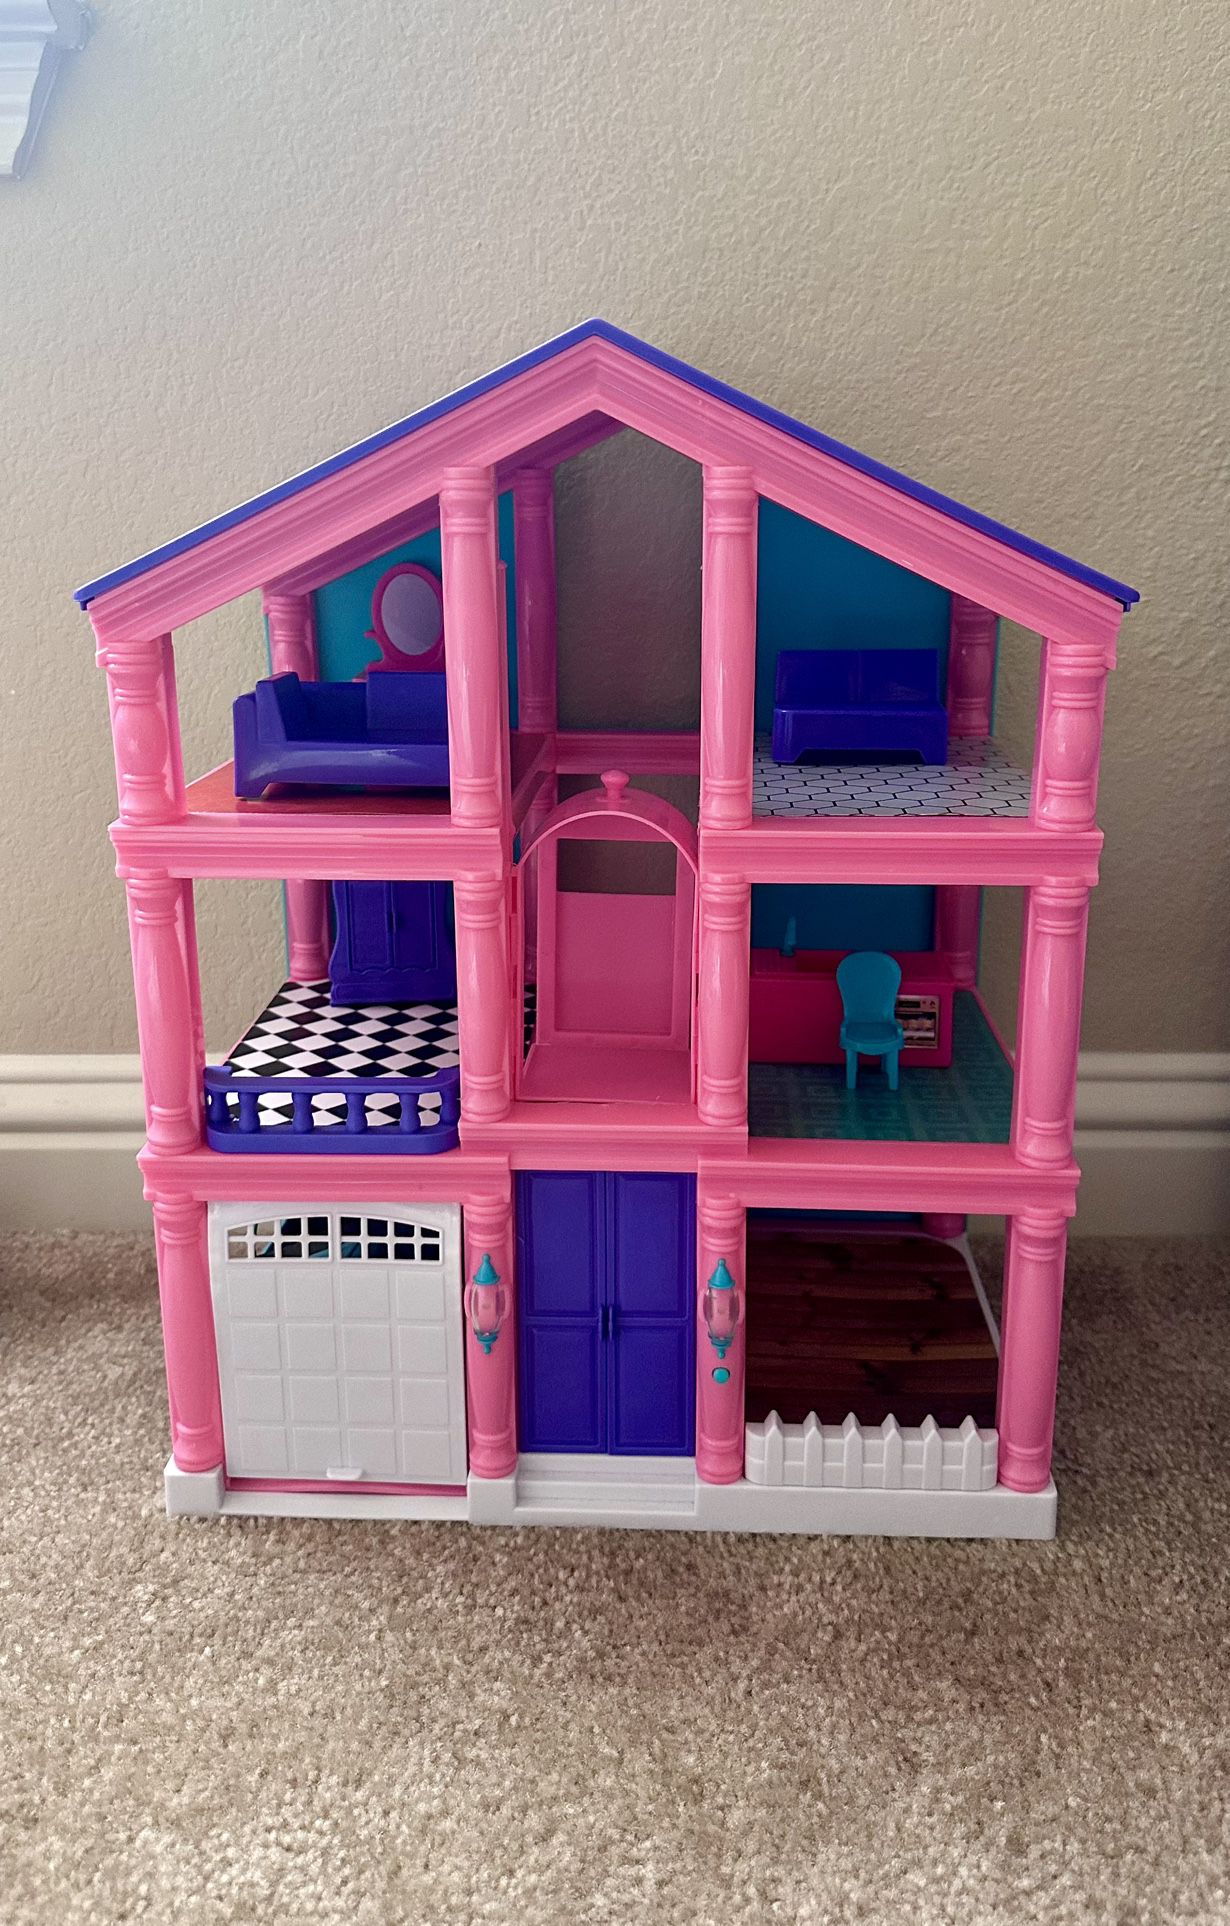 Kid Connection 3-Story Dollhouse Play Set with Elevator, Working Garage and doorbell. 